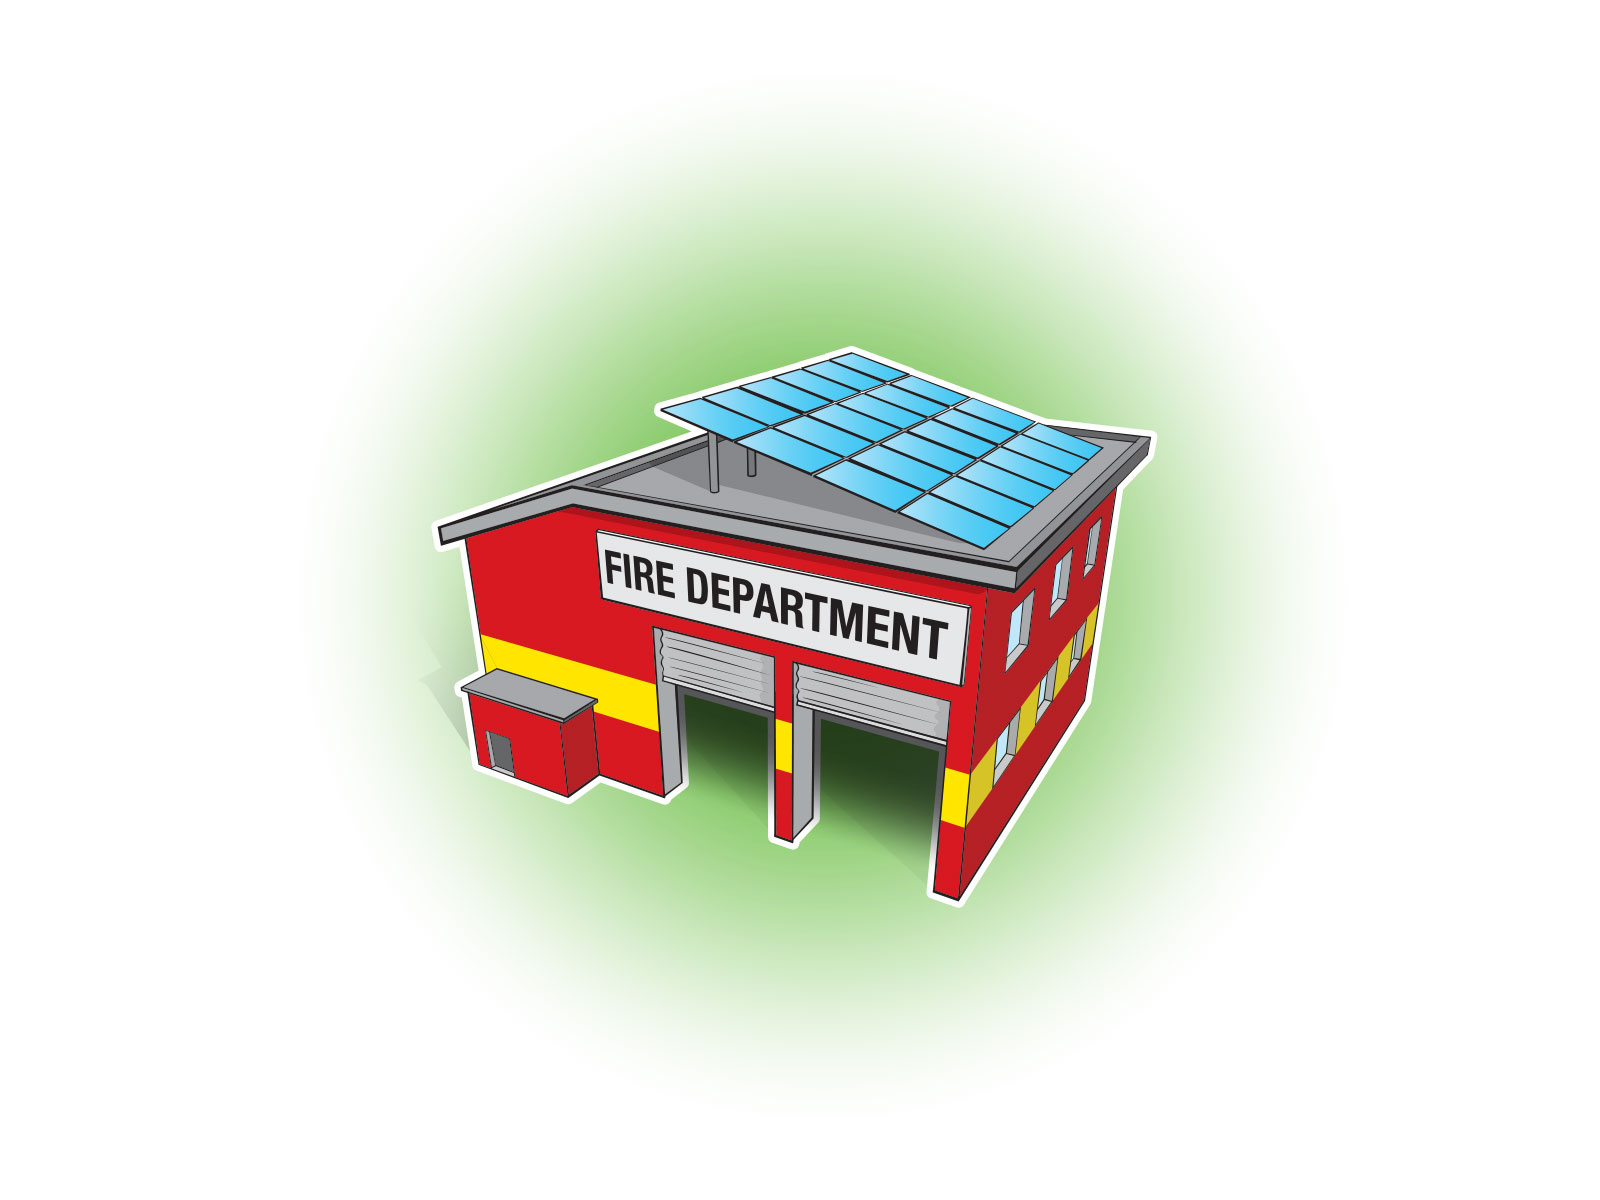 Stylised vector illustrations of fire department with solar panels